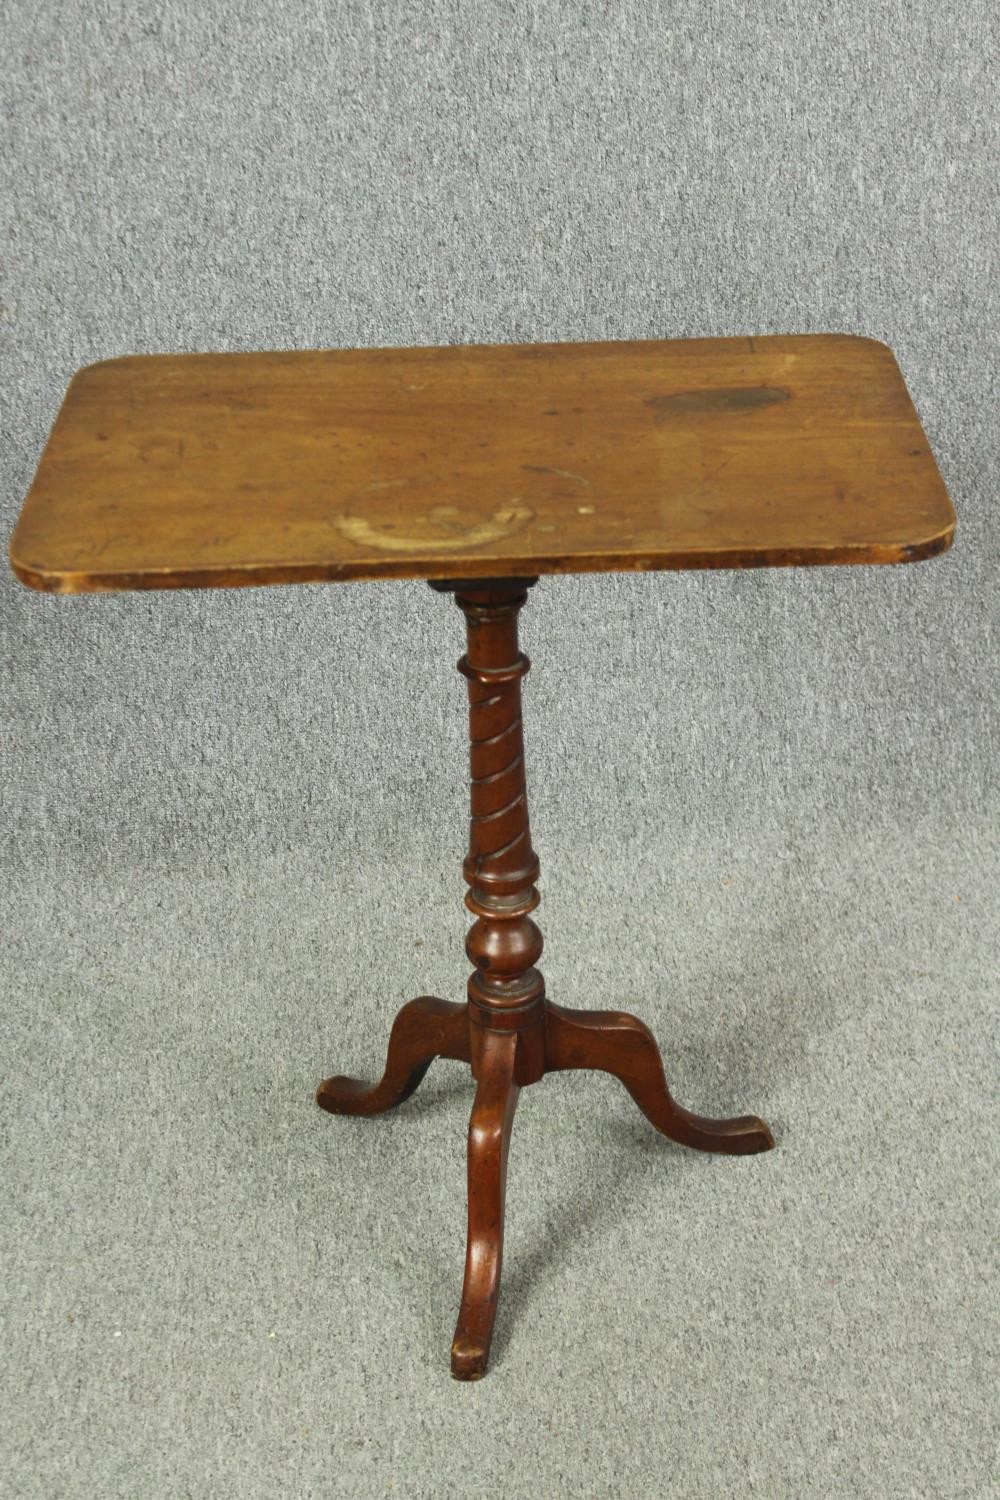 Occasional or lamp table, 19th century mahogany. H.71 W.66 D.43cm. - Image 2 of 6